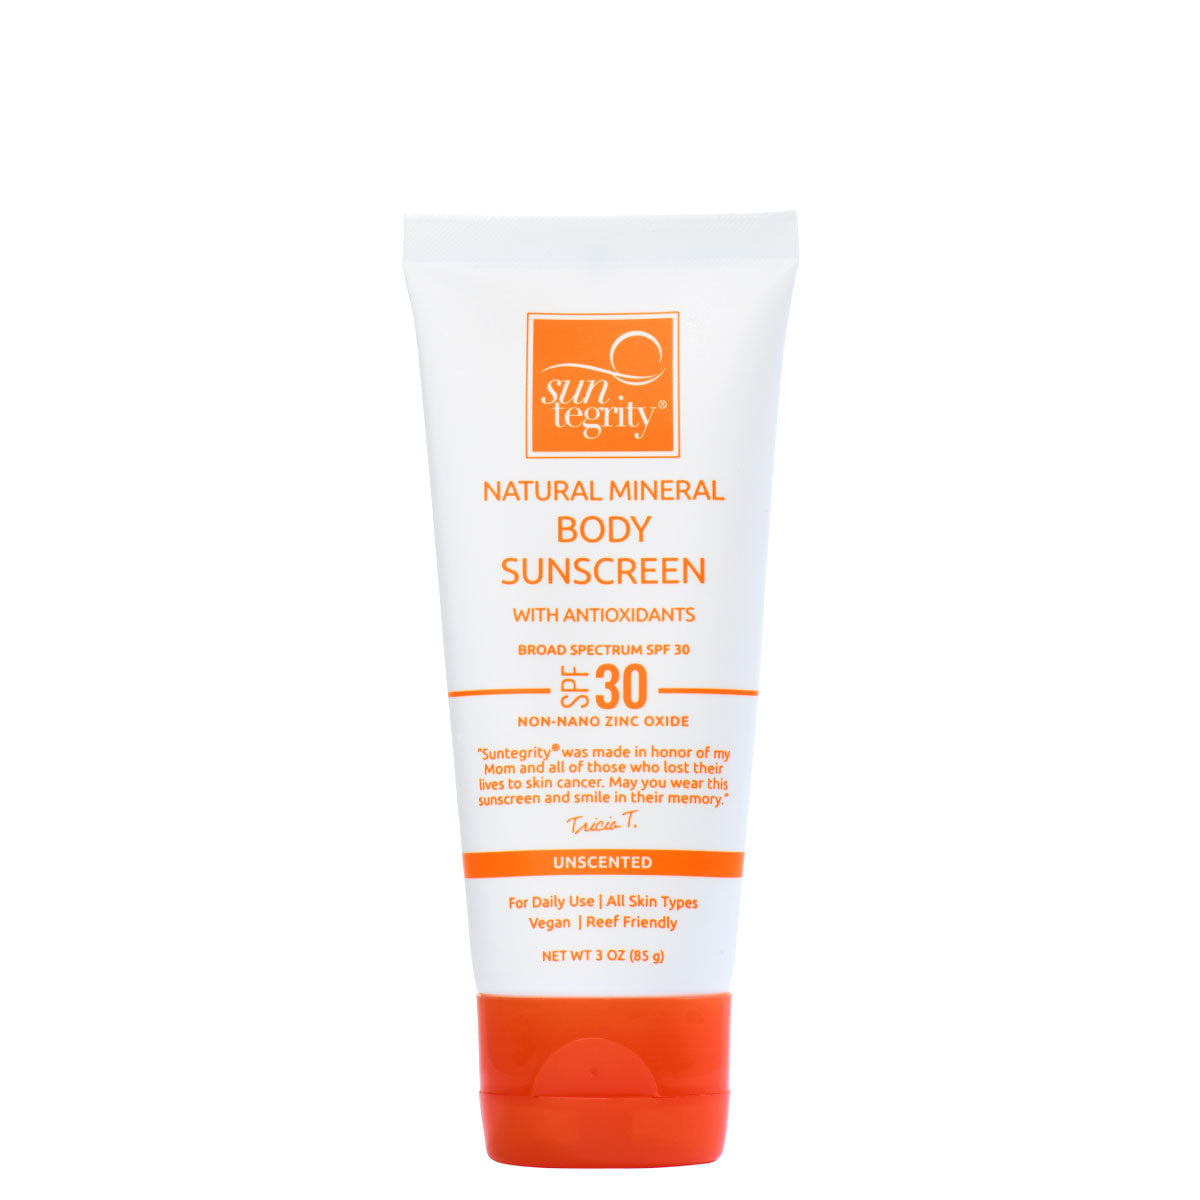 Load image into Gallery viewer, Suntegrity UNSCENTED Natural Mineral Body Sunscreen SPF 30 (3 oz)
